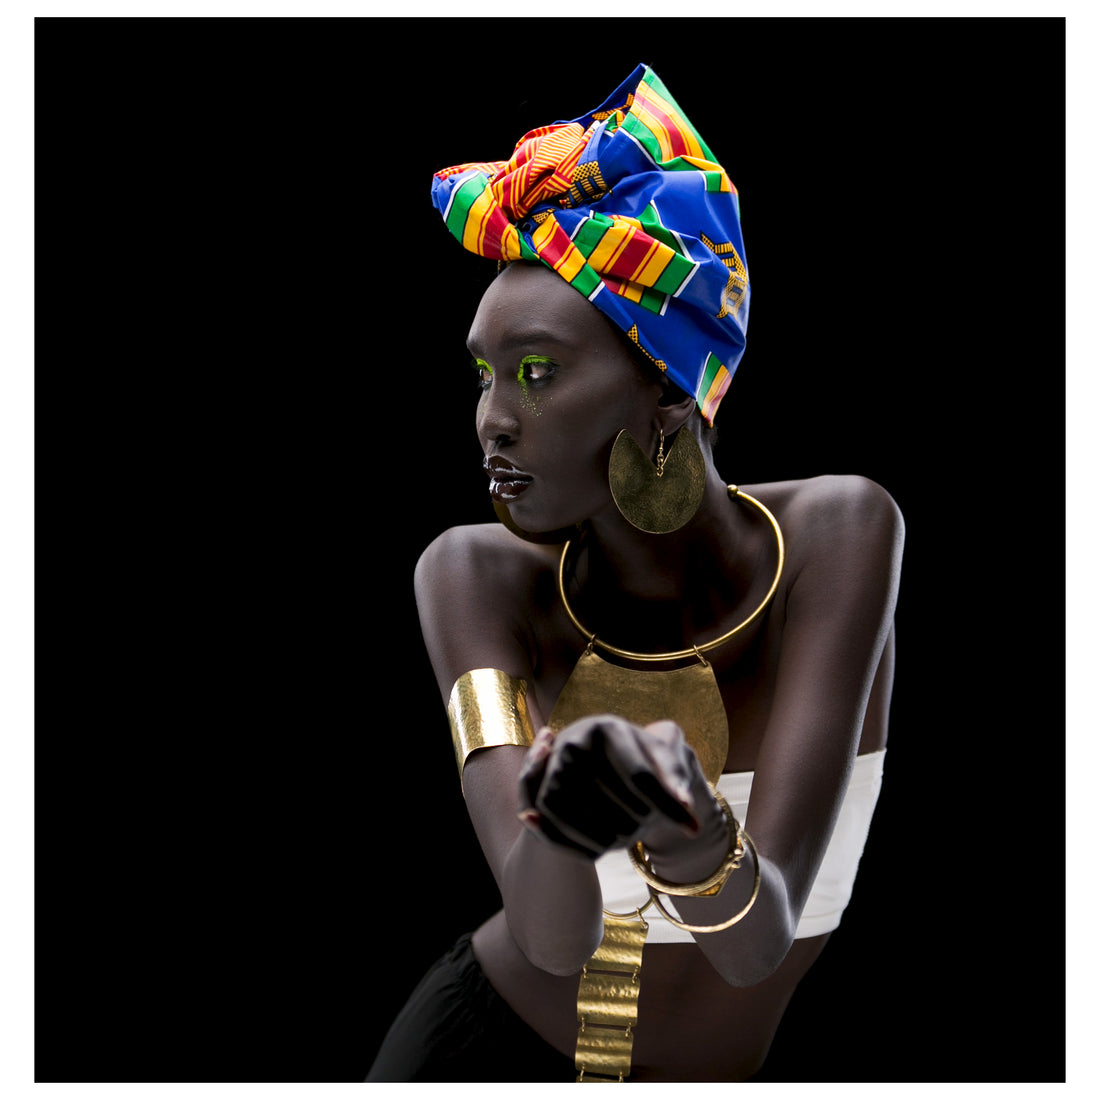 Dudu classic African Earrings - Authentic African handicrafts | Clothing, bags, painting, toys & more - CULTURE HUB by Muthoni Unchained